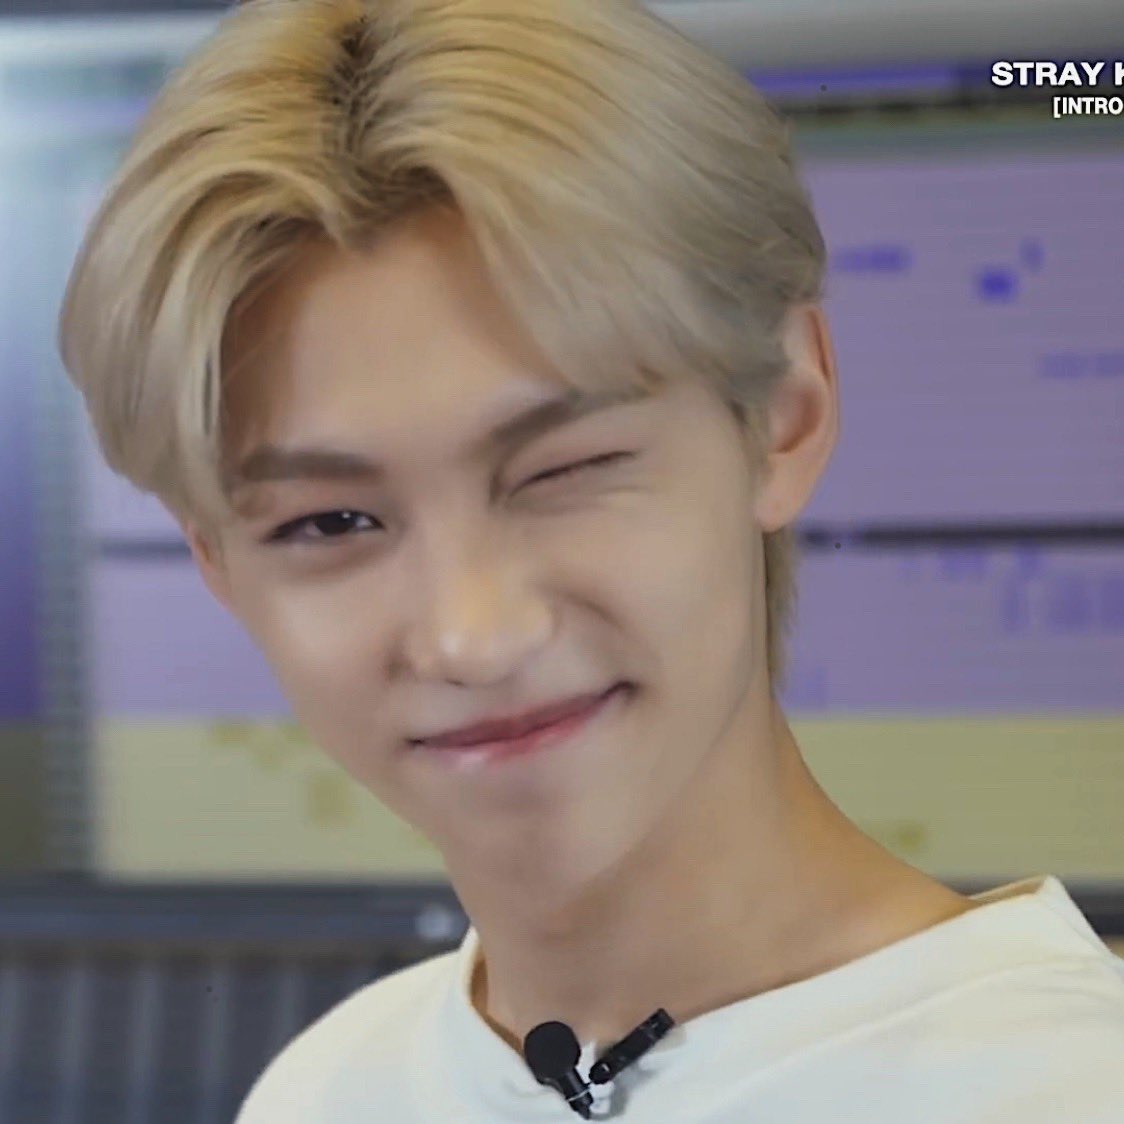 felix being the best boy in the universe: a short thread ♡